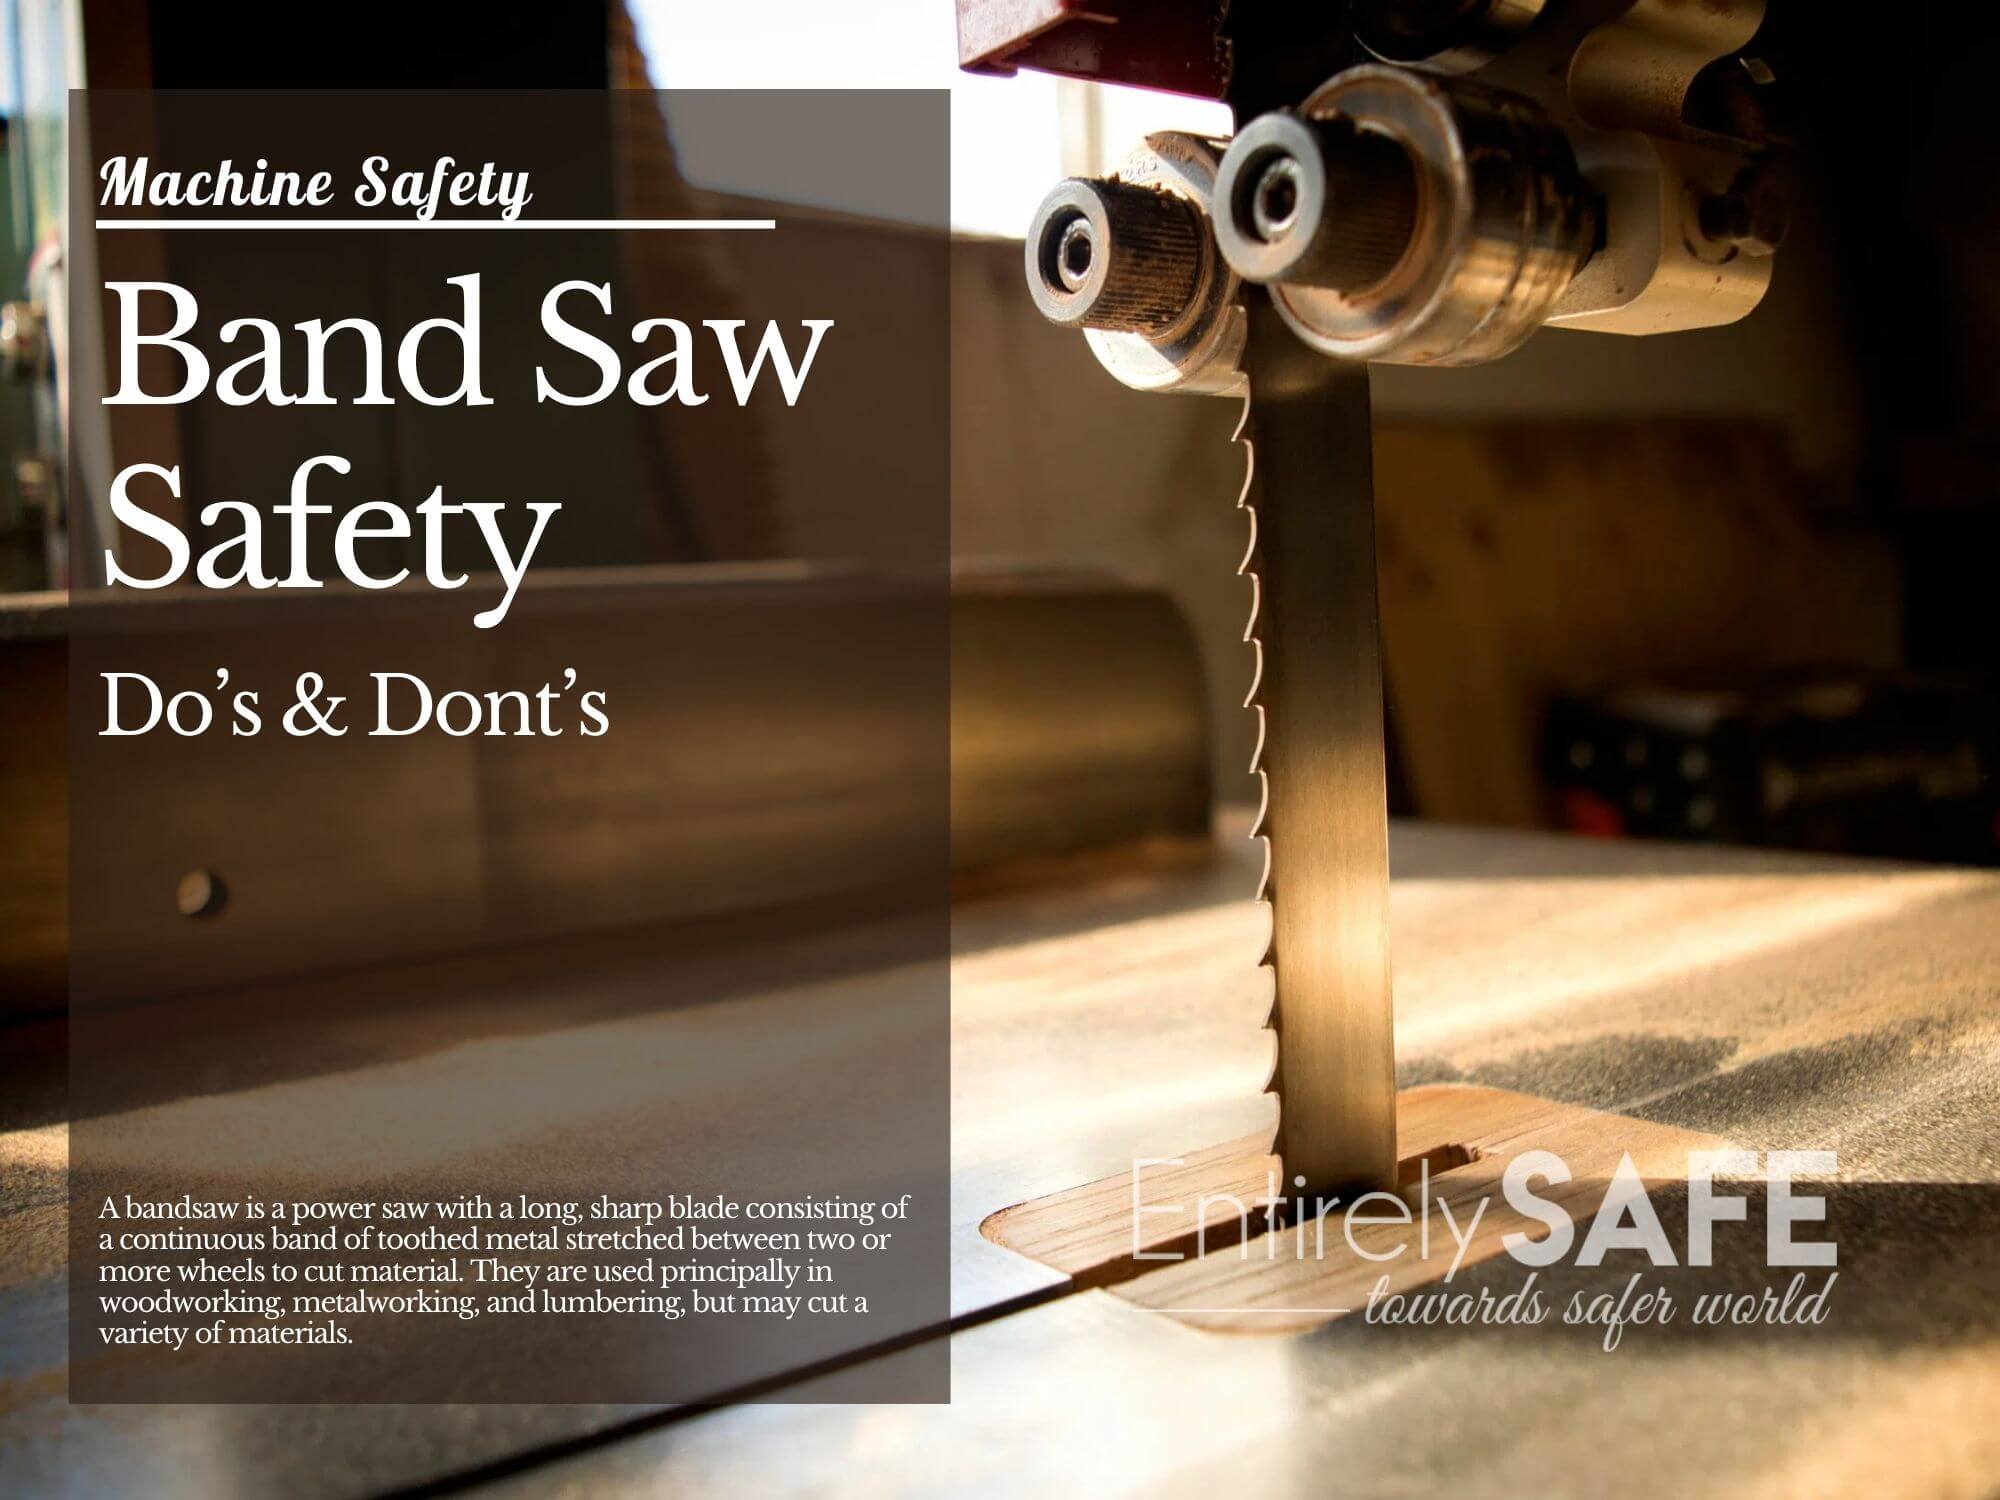 Band Saw Safety